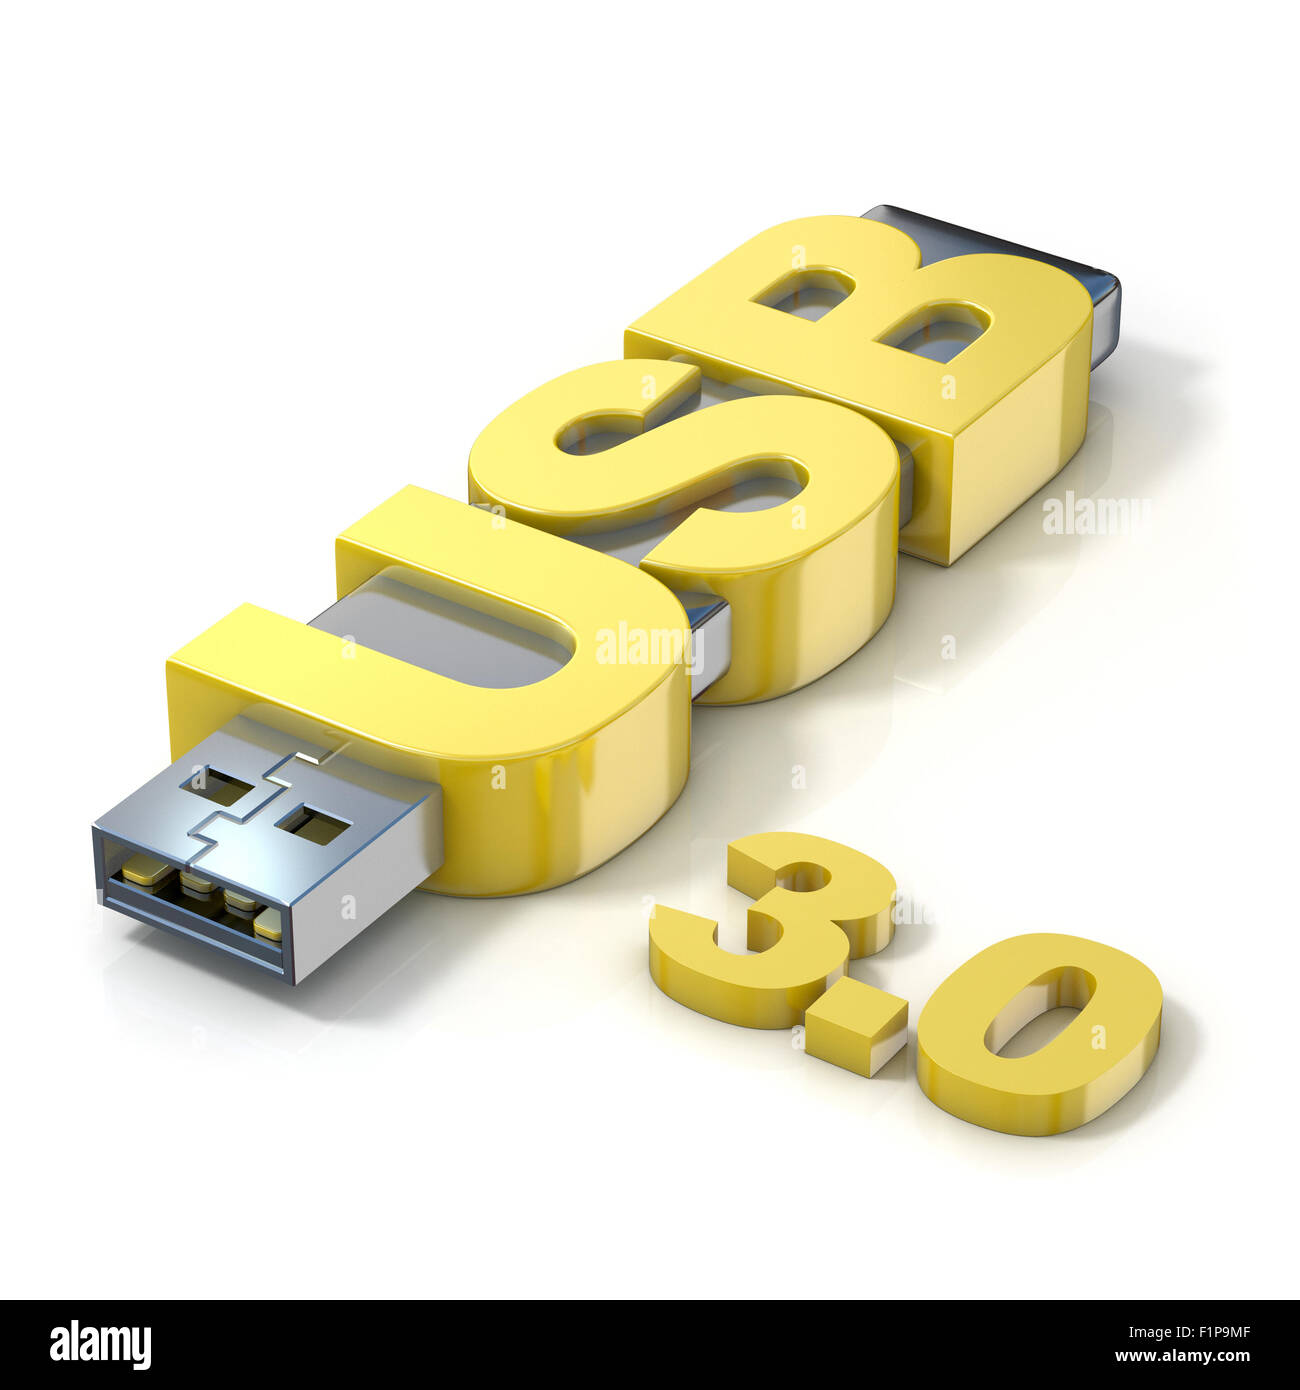 USB flash memory 3.0, made with the word USB. 3D render illustration isolated on white background Stock Photo